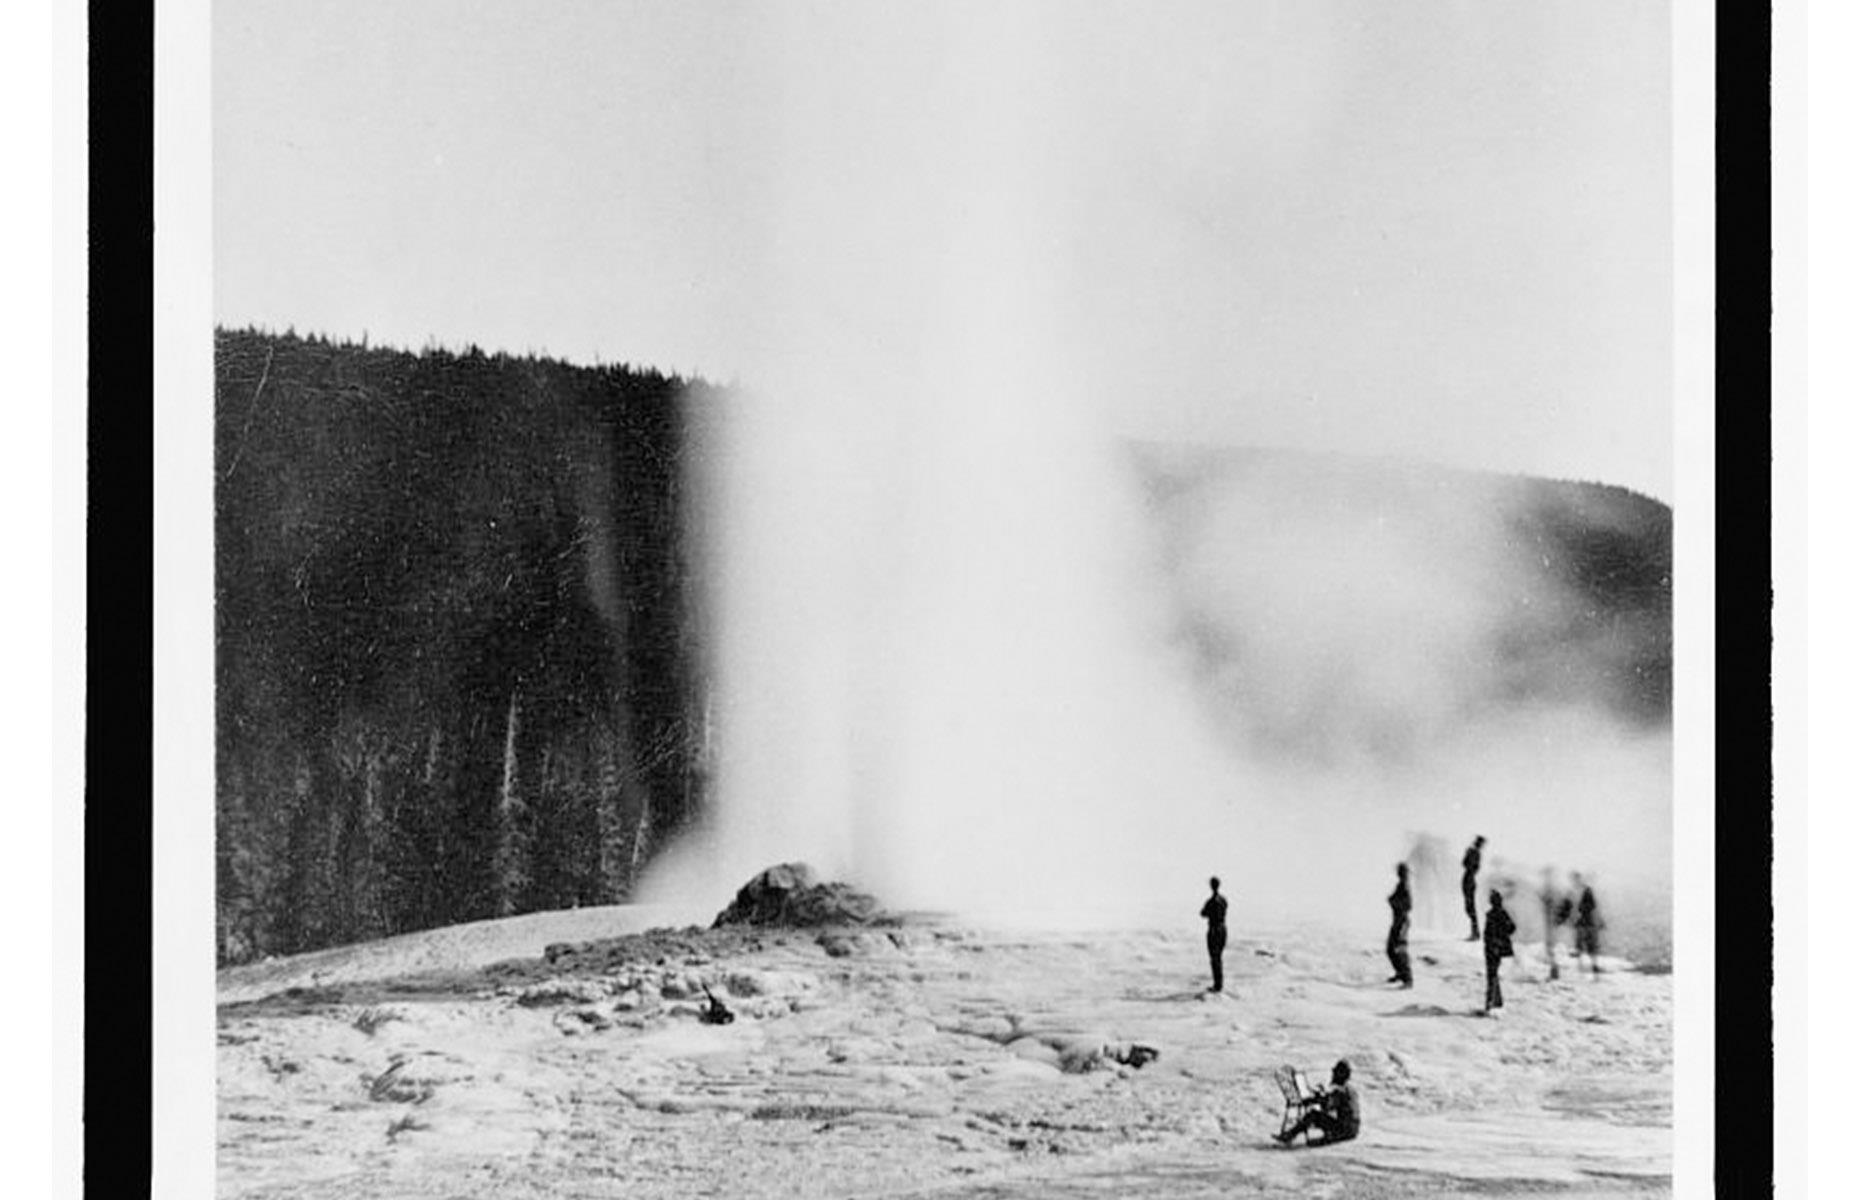 The Yellowstone National Park Protection Act prohibited development in the designated area, safeguarding the site "as a public park or pleasuring-ground for the benefit and enjoyment of the people". This photo dating to 1883 shows park visitors gazing up in awe as the Old Faithful geyser puts on a show.